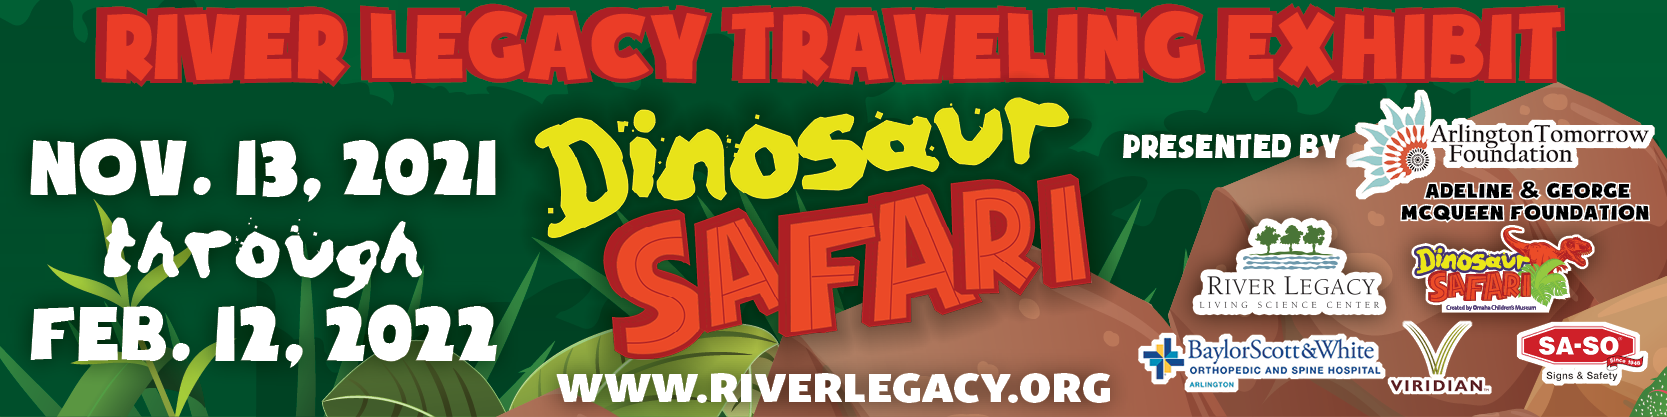 Attend Dinosaur Safari at River Legacy Living Science Center in Fort Worth.